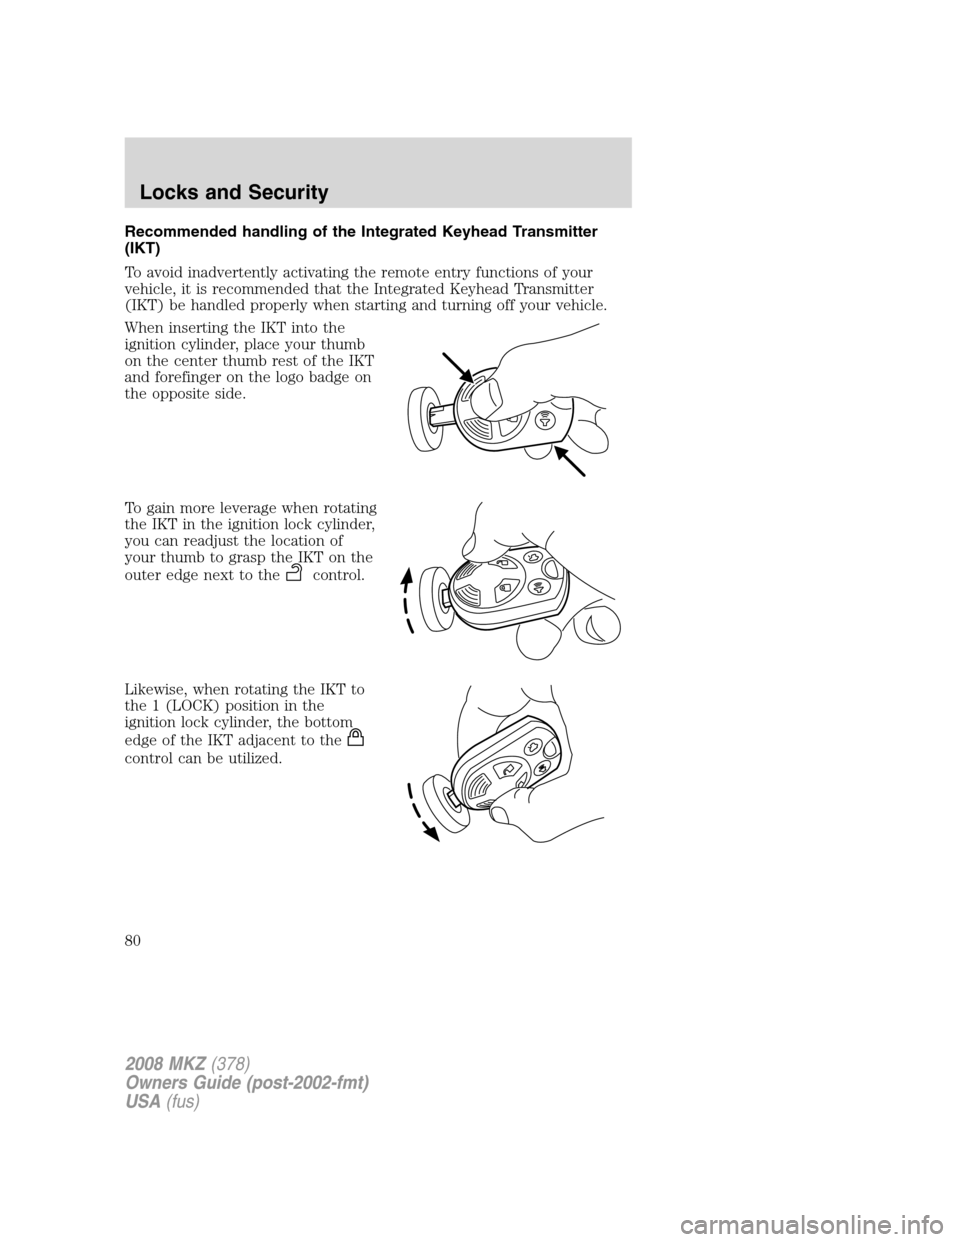 LINCOLN MKZ 2008  Owners Manual Recommended handling of the Integrated Keyhead Transmitter
(IKT)
To avoid inadvertently activating the remote entry functions of your
vehicle, it is recommended that the Integrated Keyhead Transmitter